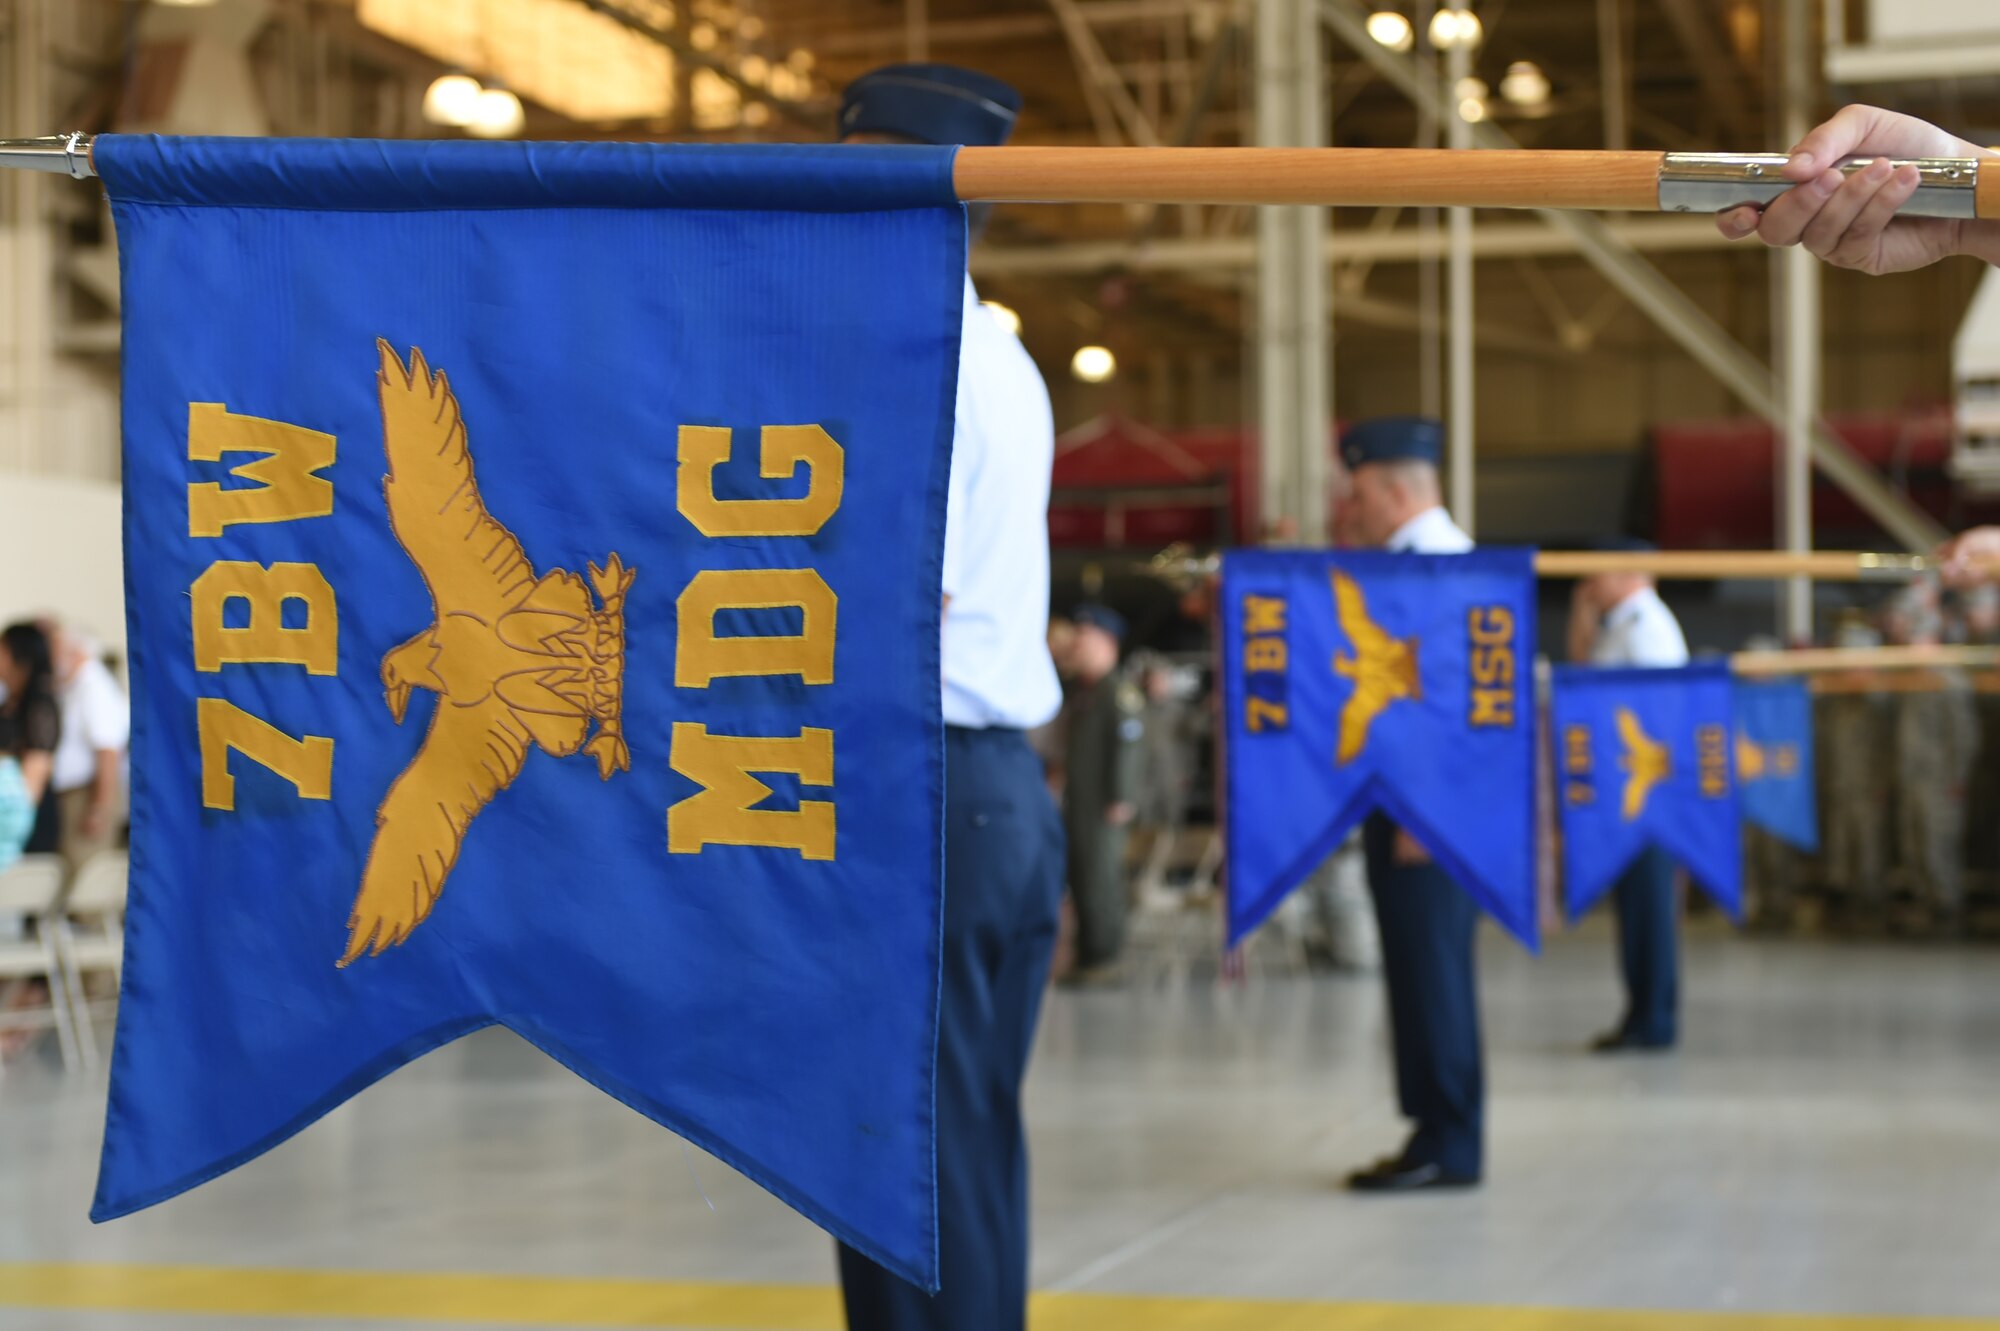 7th Bomb Wing welcomes new commander